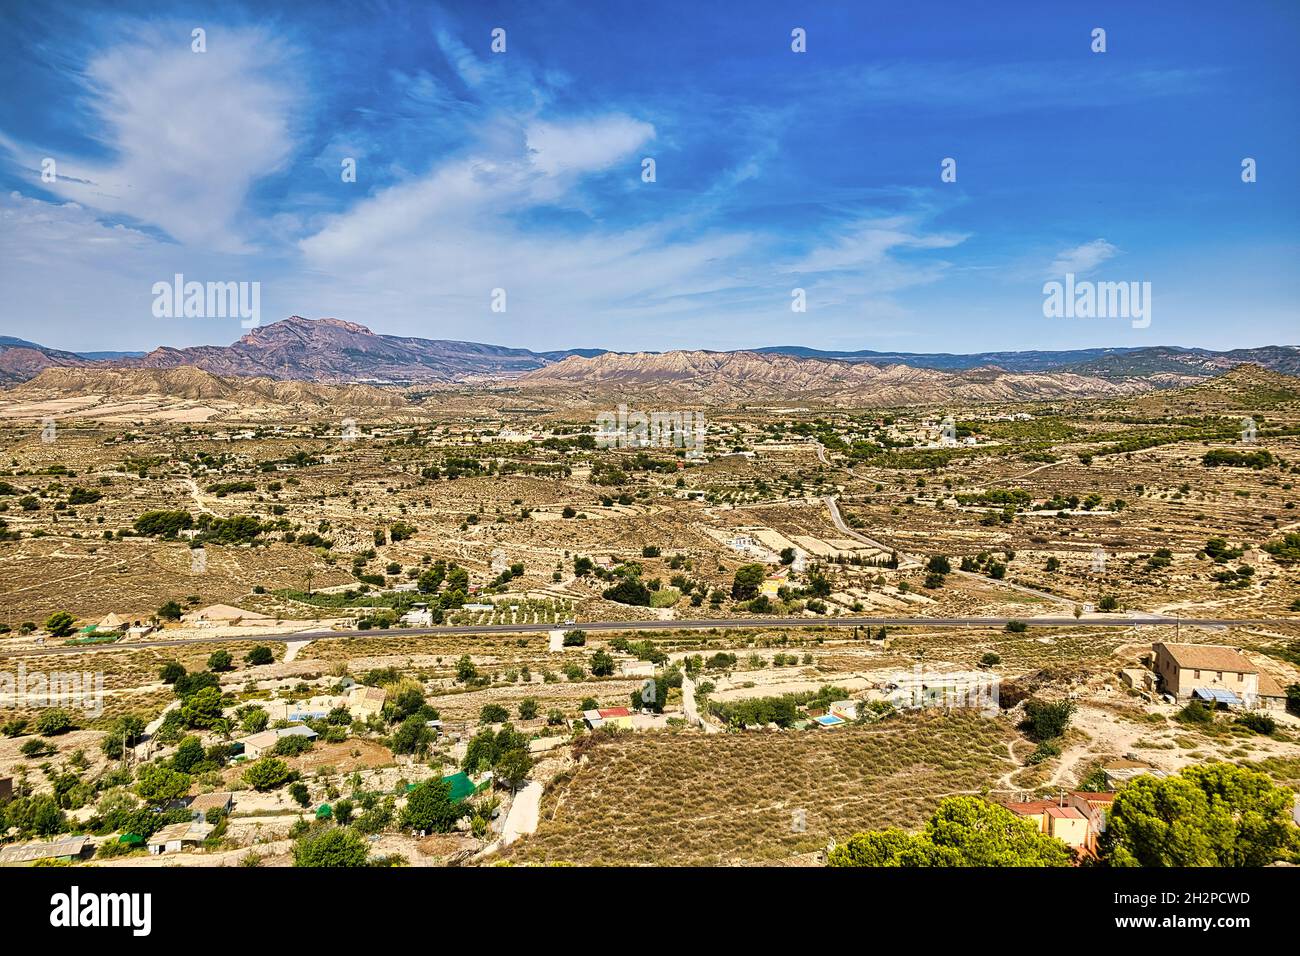 View from the hill to the Busot area and the Cabeco D'or mountain range. Beautiful sunny landscape with a blue sky.Horizontal view Stock Photo